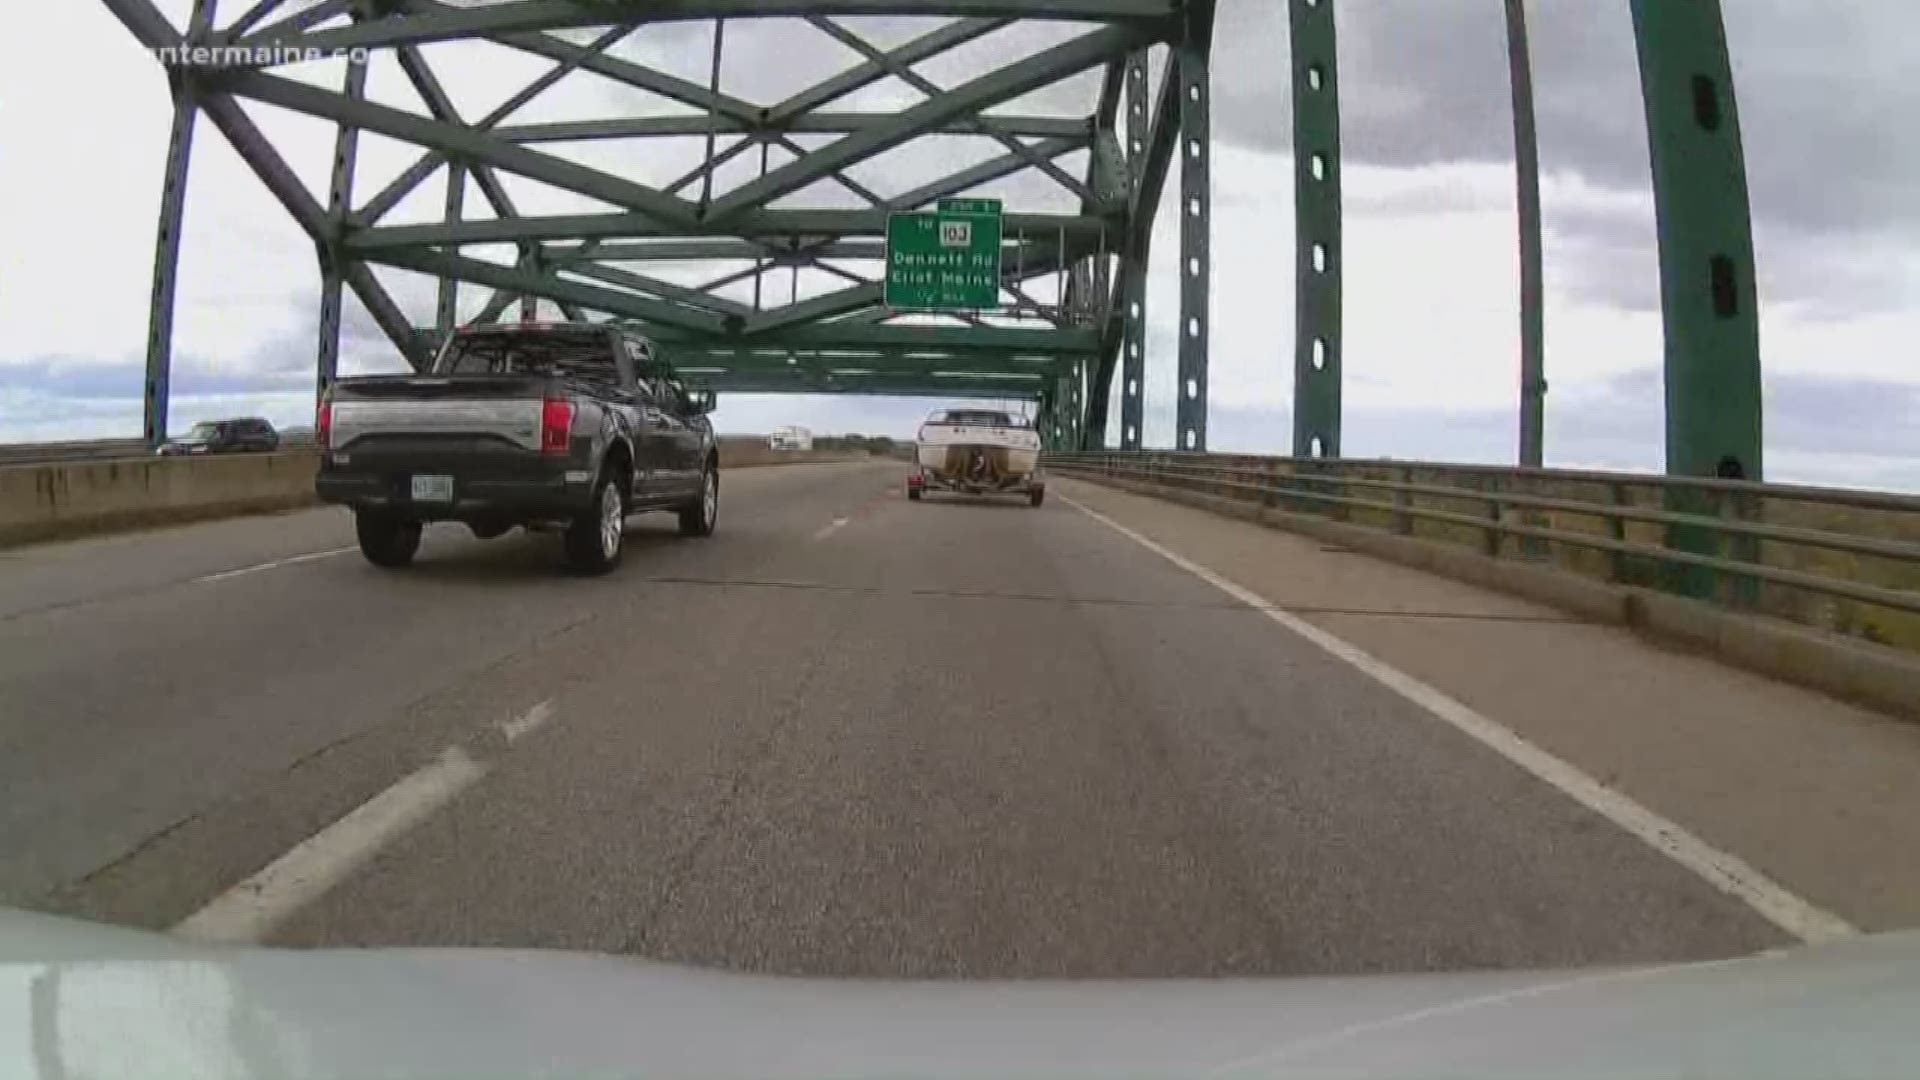 Construction projects at the Piscataqua Bridge and York tolls could impact summer tourism traffic this year.